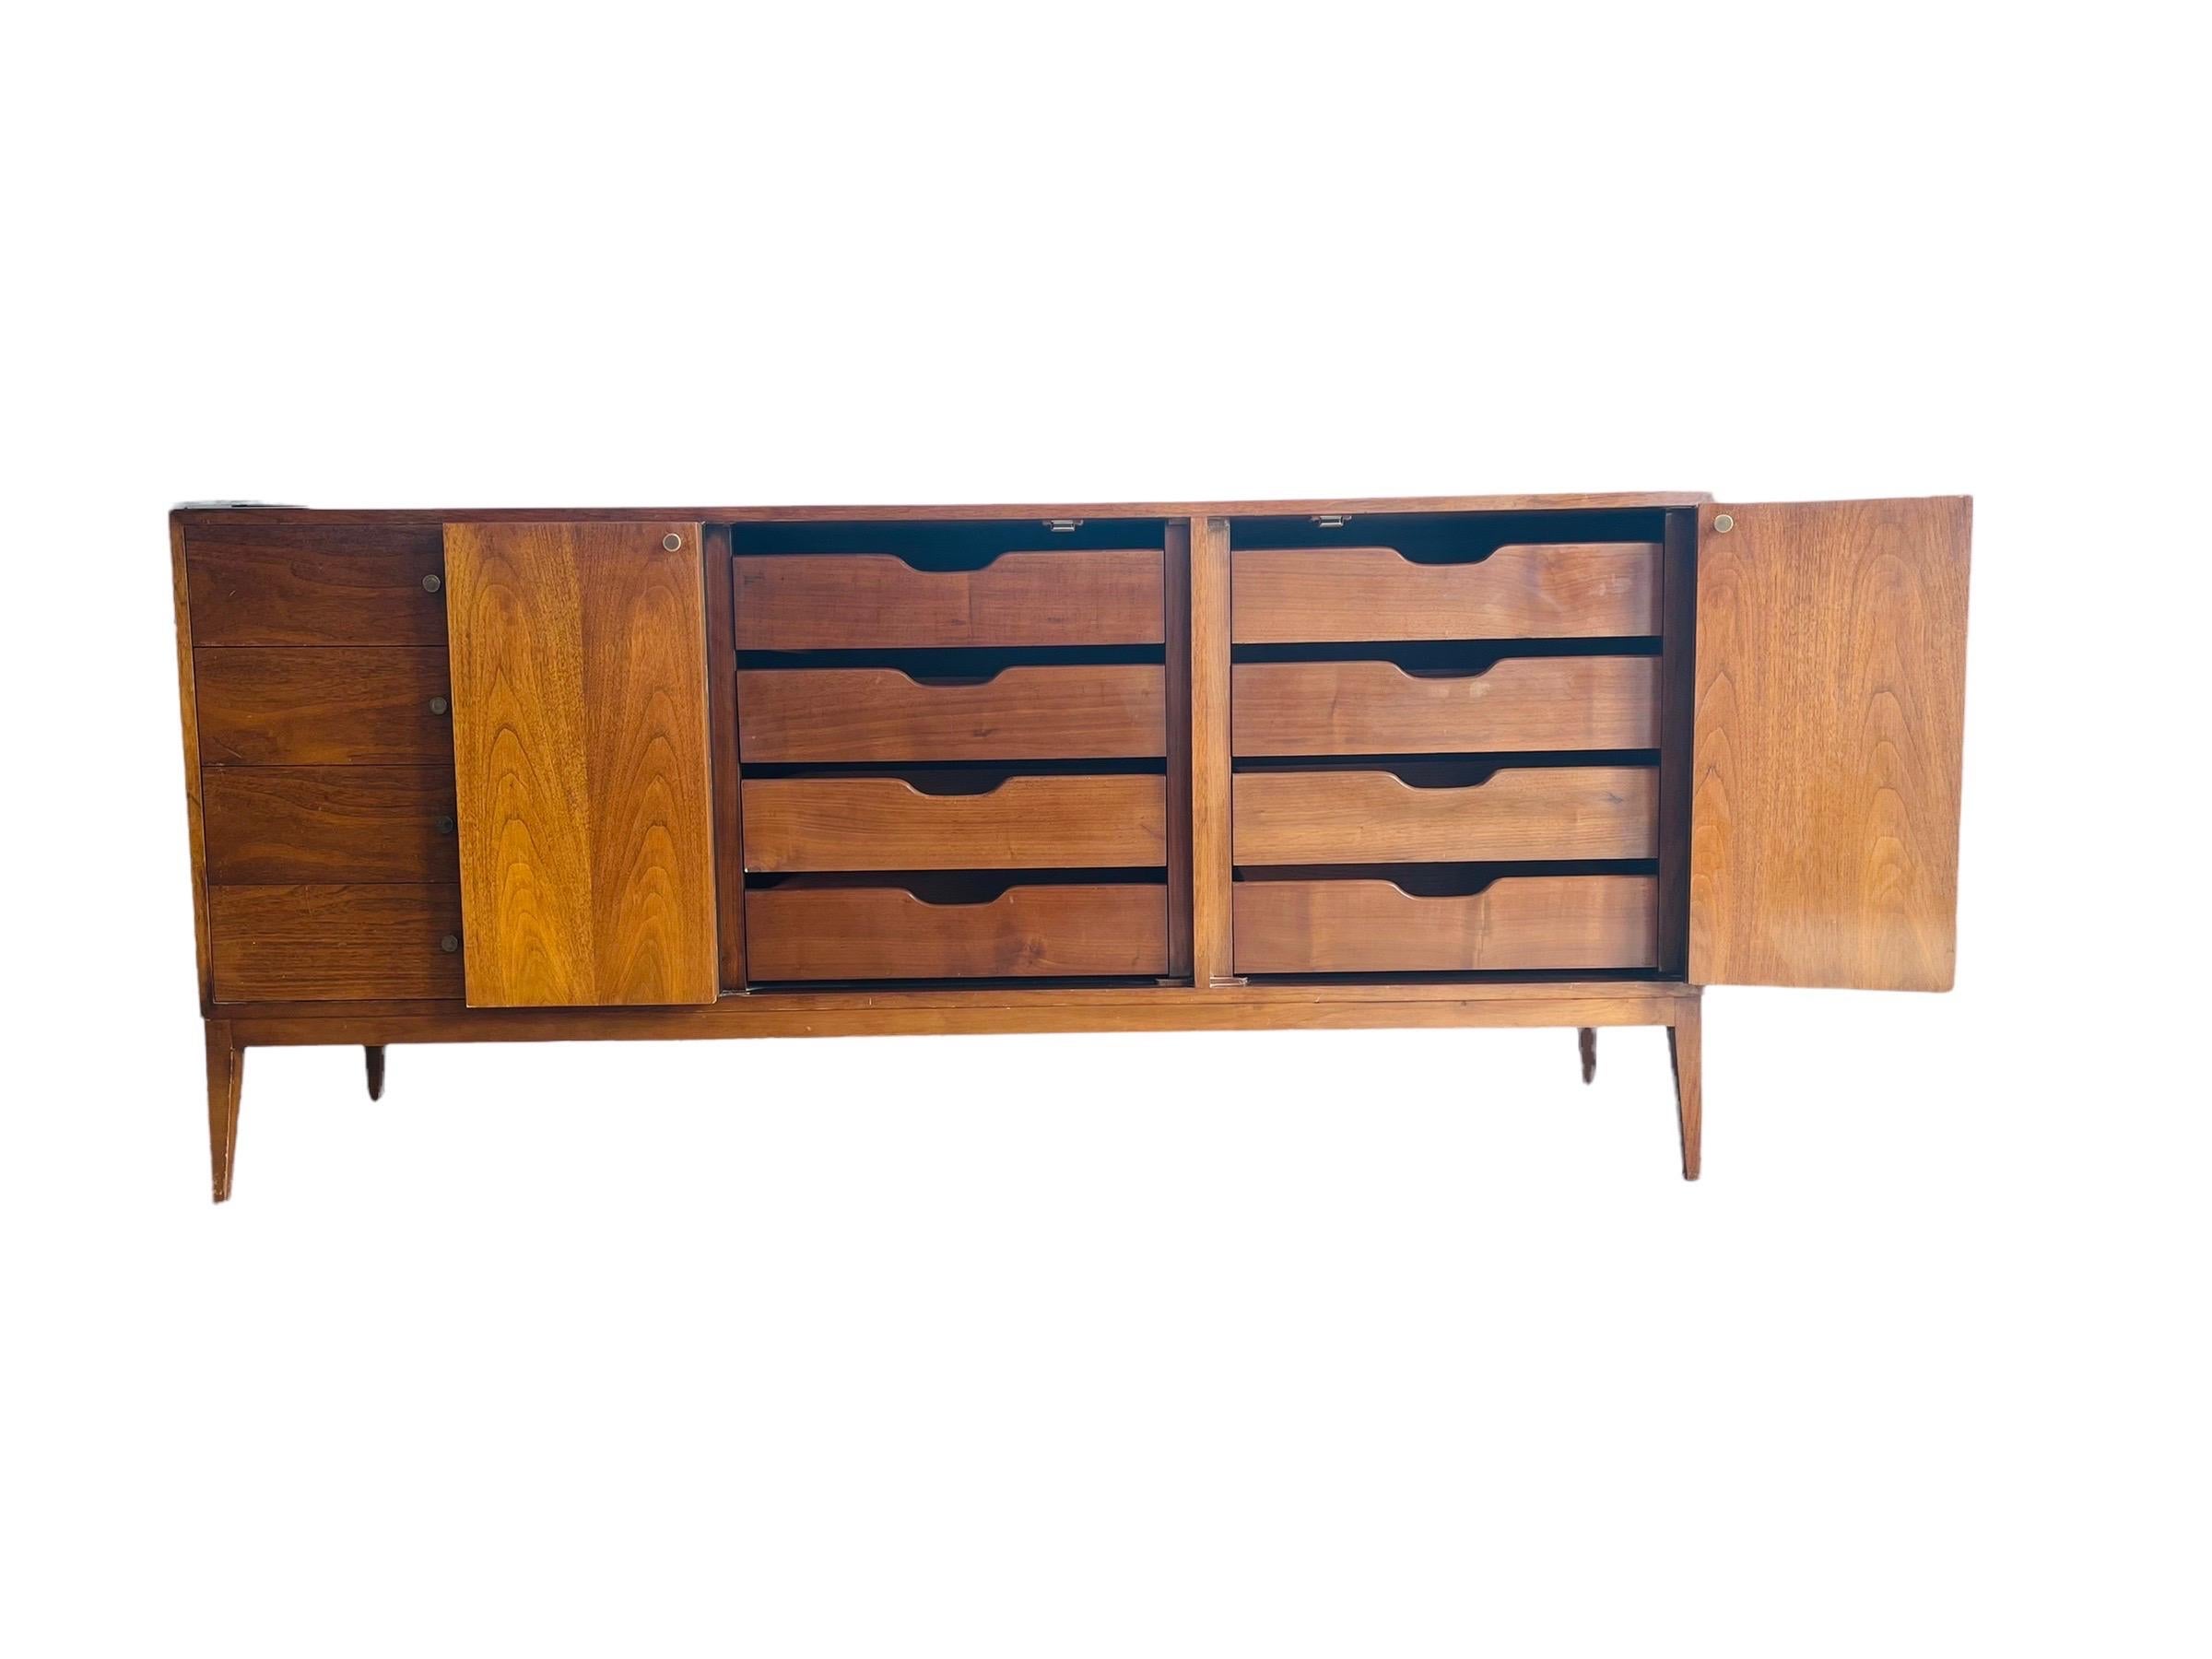 Stunning Mid-Century Modern Paul McCobb style Walnut Triple dresser in great vintage condition with normal wear consistent with age and use. This dresser is equipped with 12 drawers, with 8 drawers being behind the folding doors. 

Measures: W 72”